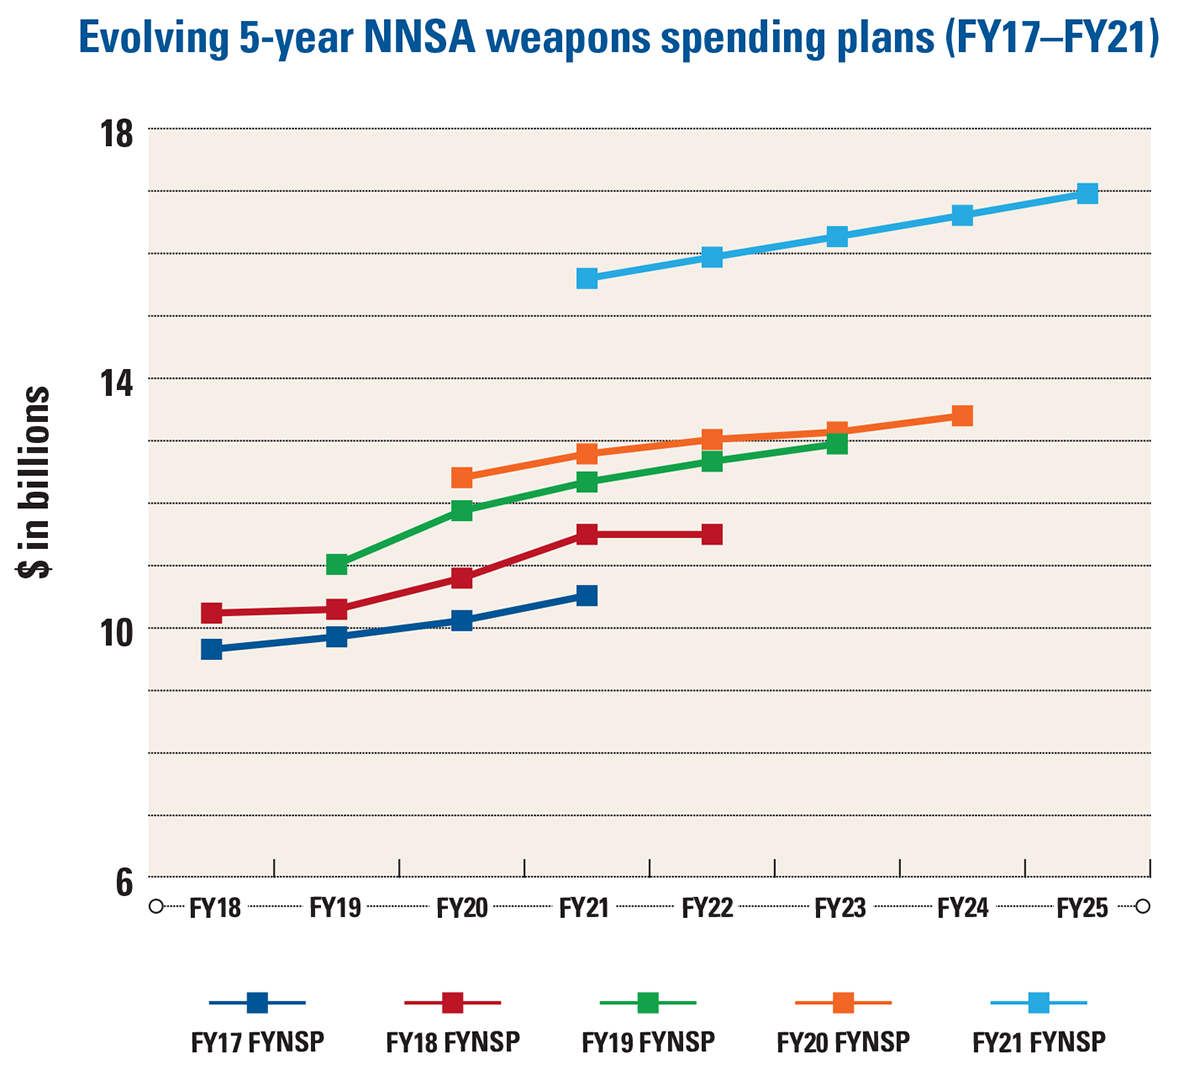 This chart shows the NNSA’s future-years nuclear security program (FYNSP) for each fiscal year starting with FY 2017. The FYNSP reflects what the agency estimates its budget will be for that current fiscal year and the four succeeding fiscal years.